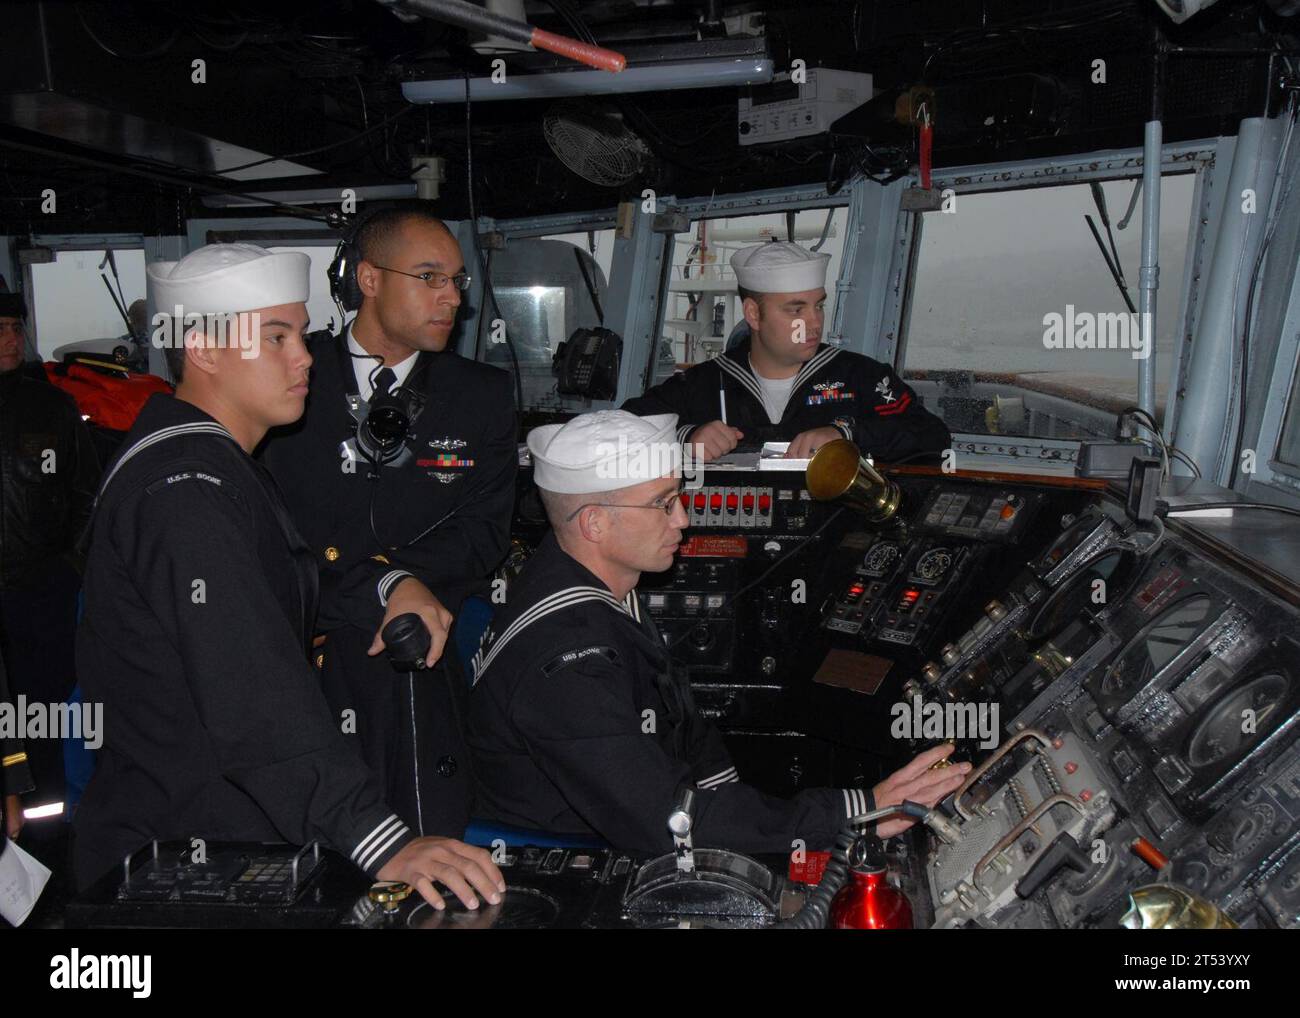 Chile, guided-missile frigate, navigation safety team, navy, Southern Seas 2011, Talcahuano, U.S. Navy, USS Boone (FFG 28) Stock Photo